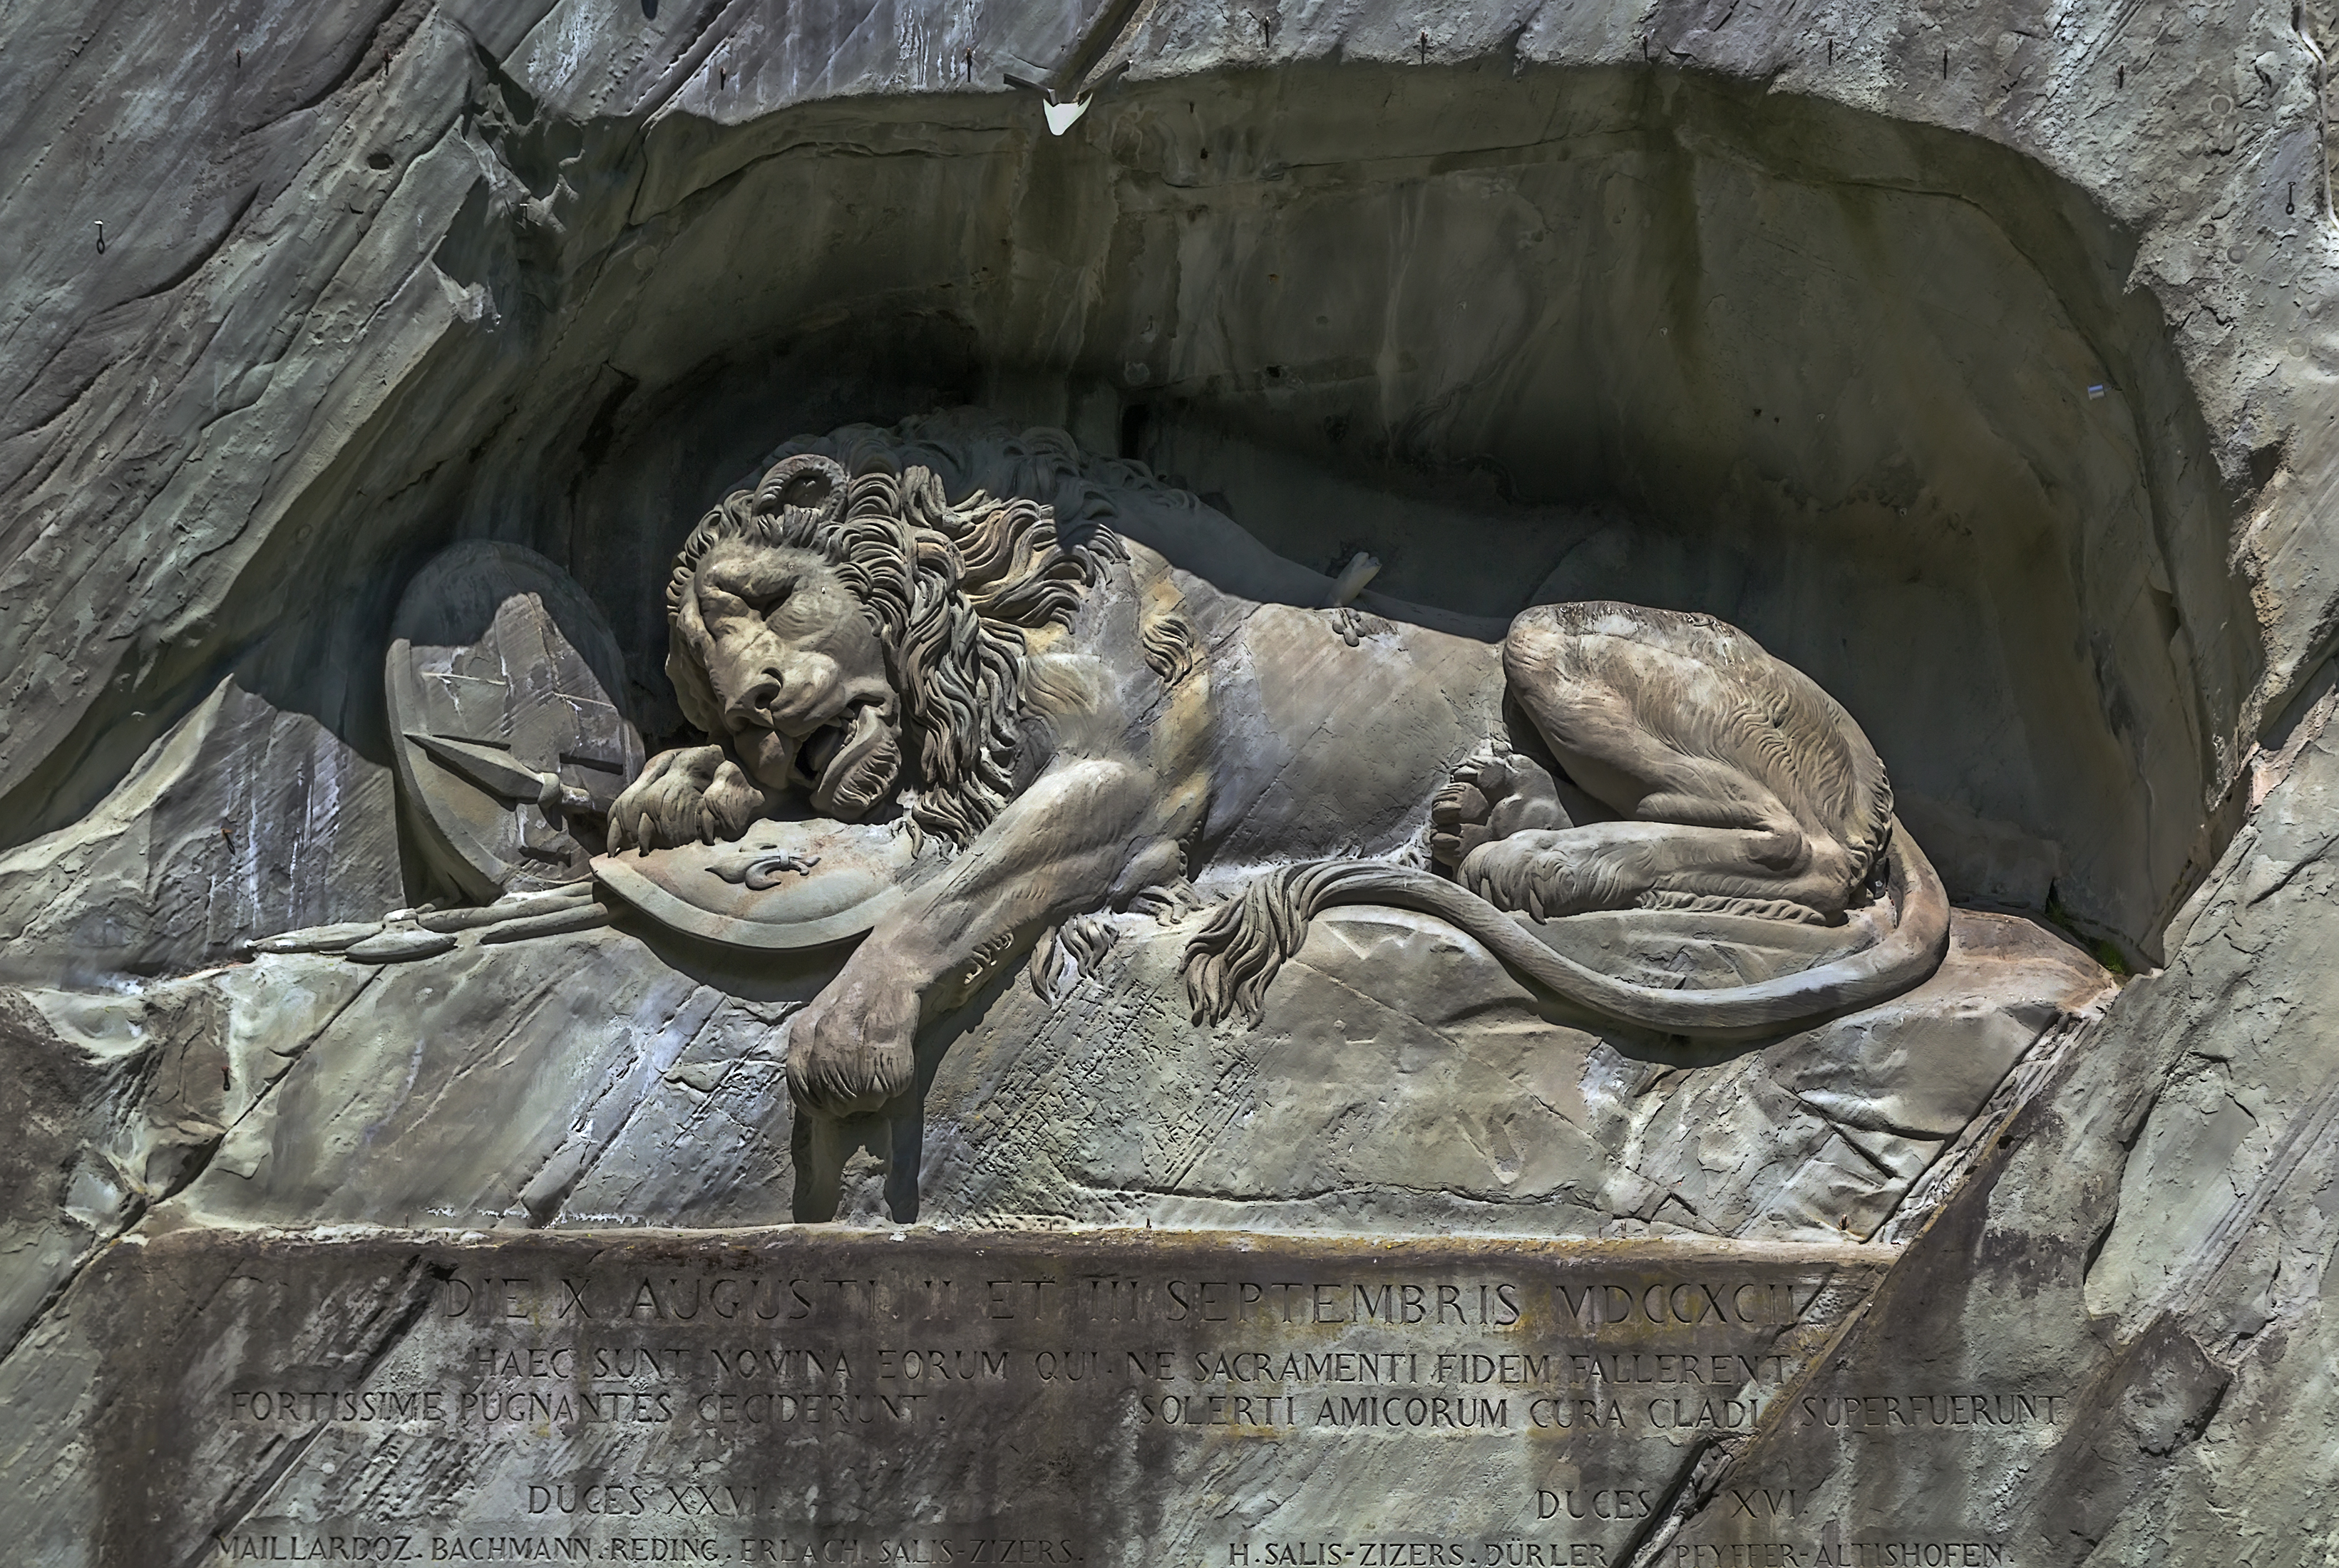 Epic Vacation in Switzerland with Your Family in 8 Days - Lion Monument in Lucerne, Switzerland